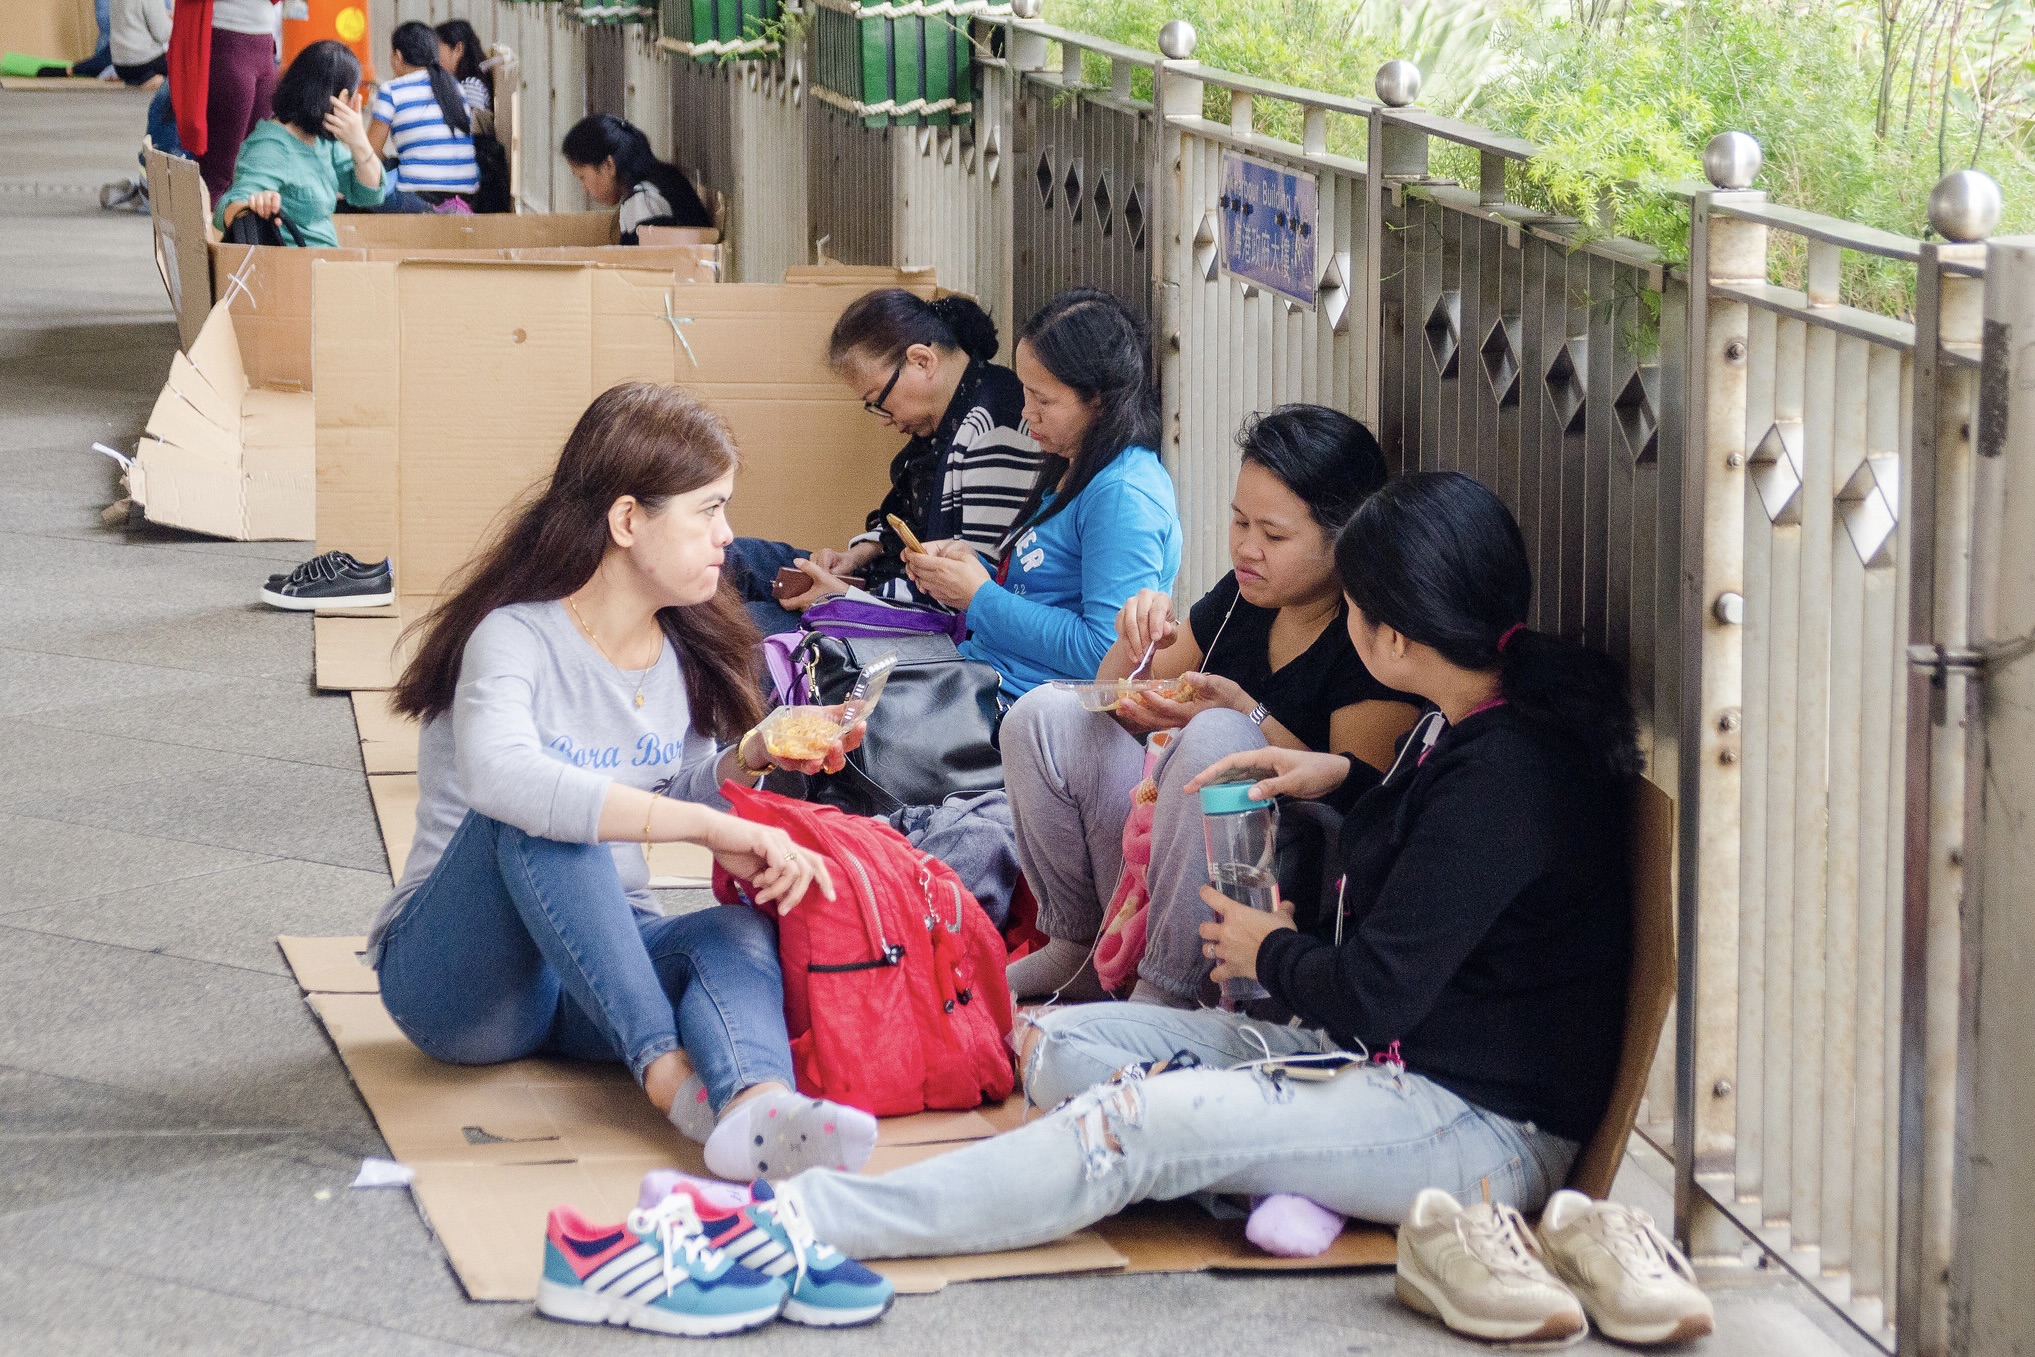 A group of foreign domestic helpers sit on flattened cardboard boxes at a covered pedestrian walkway in Hong Kong. They are relaxed and not wearing their shoes. Some of them are eating, while others scroll through their mobile phones.